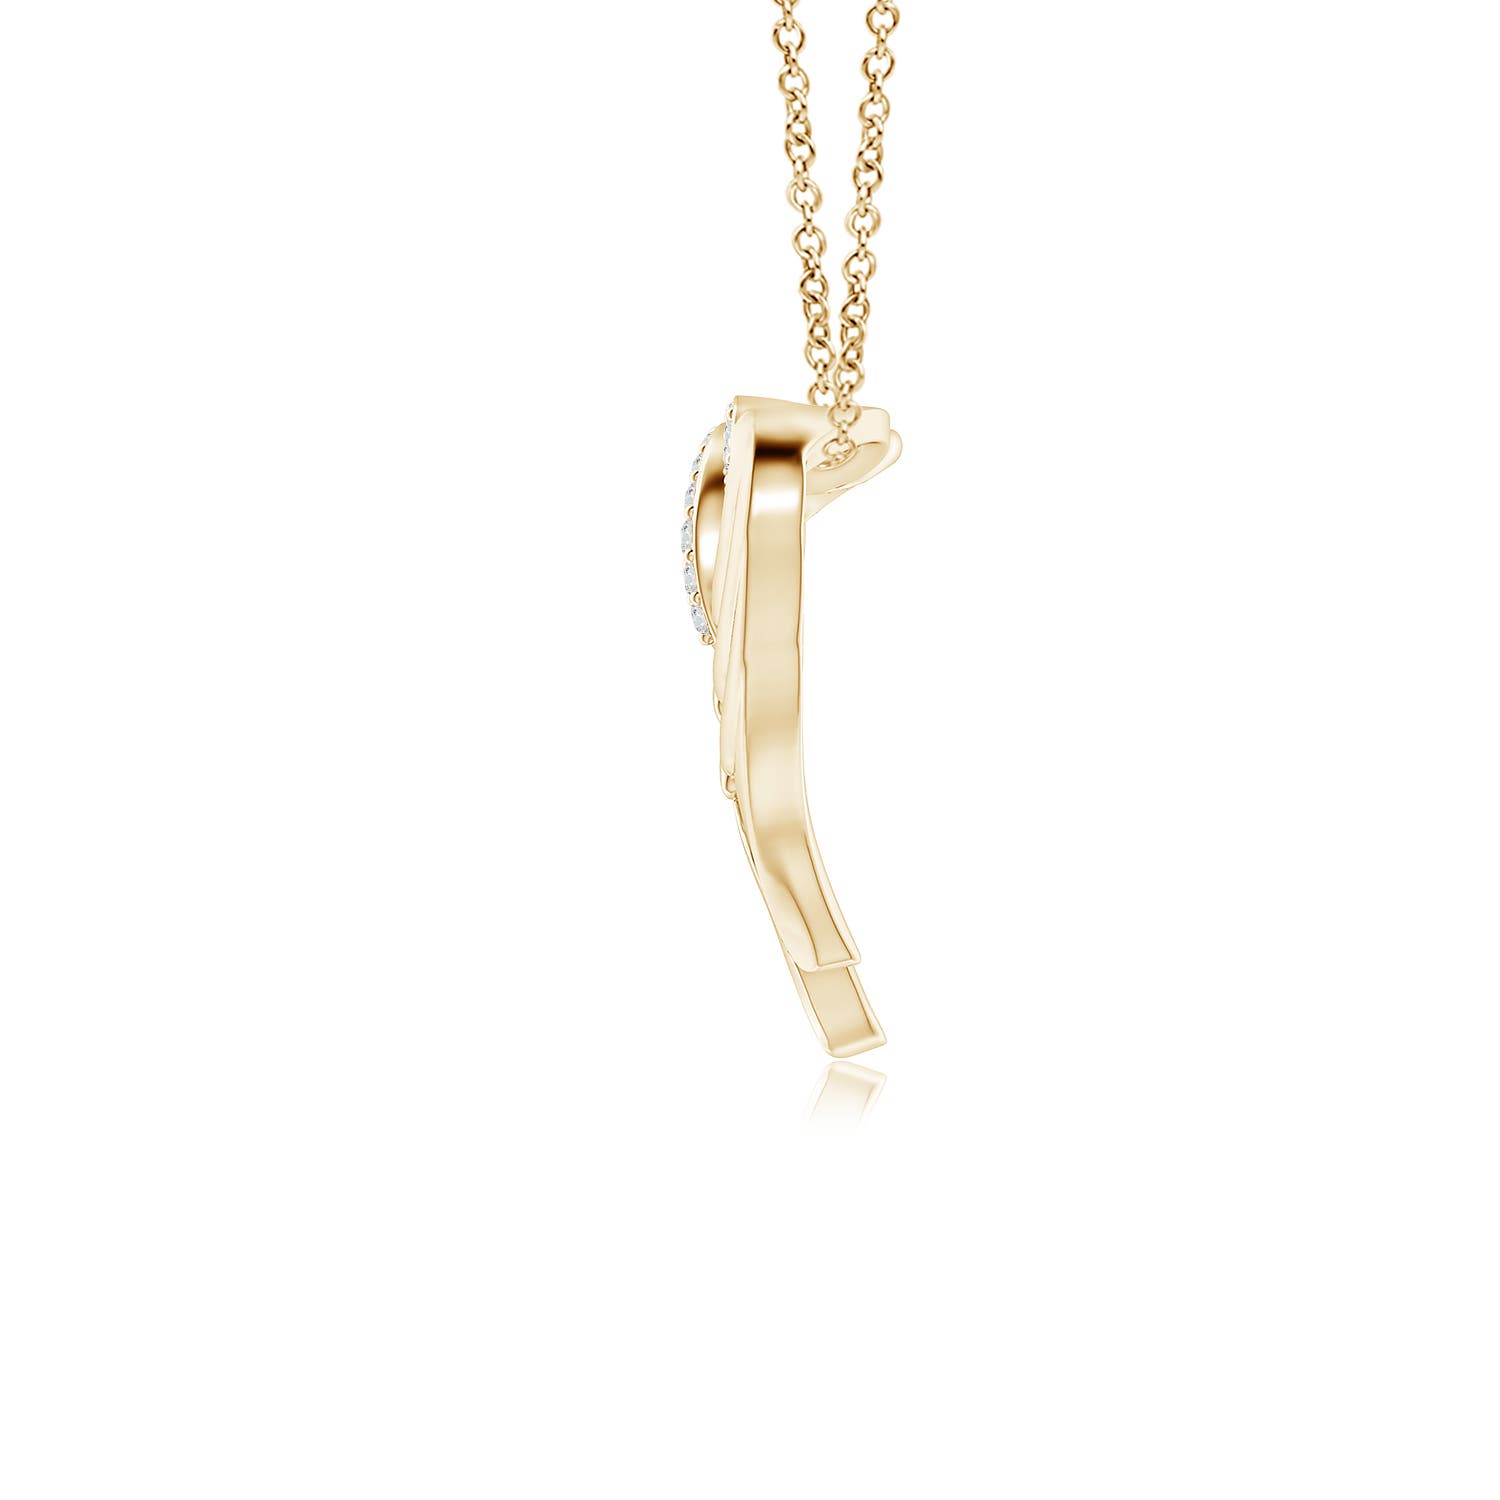 H, SI2 / 0.06 CT / 14 KT Yellow Gold